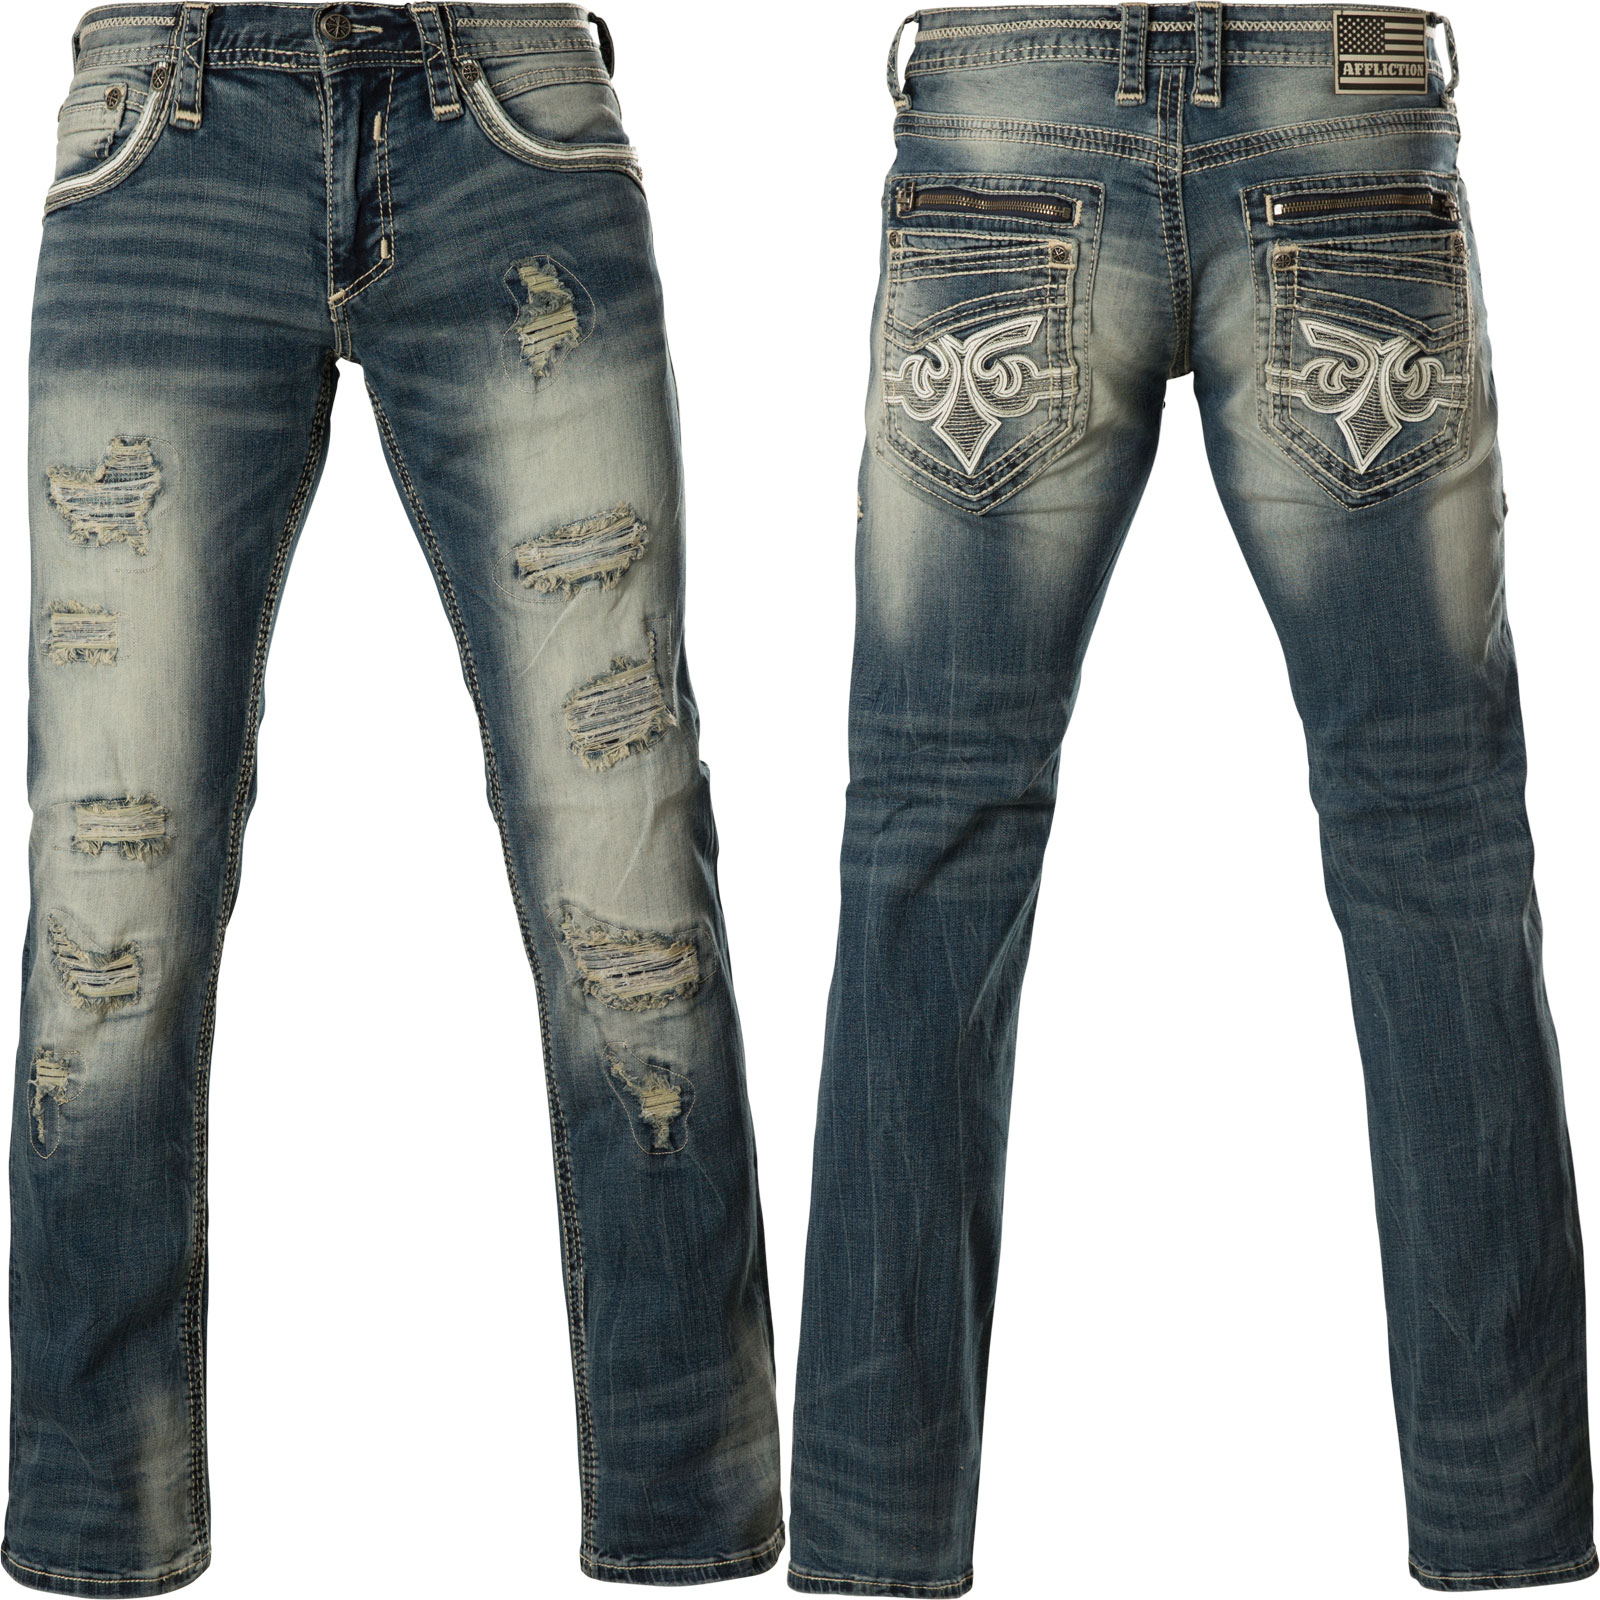 Affliction Jeans Ace Armory Jacksonville with holes and tears